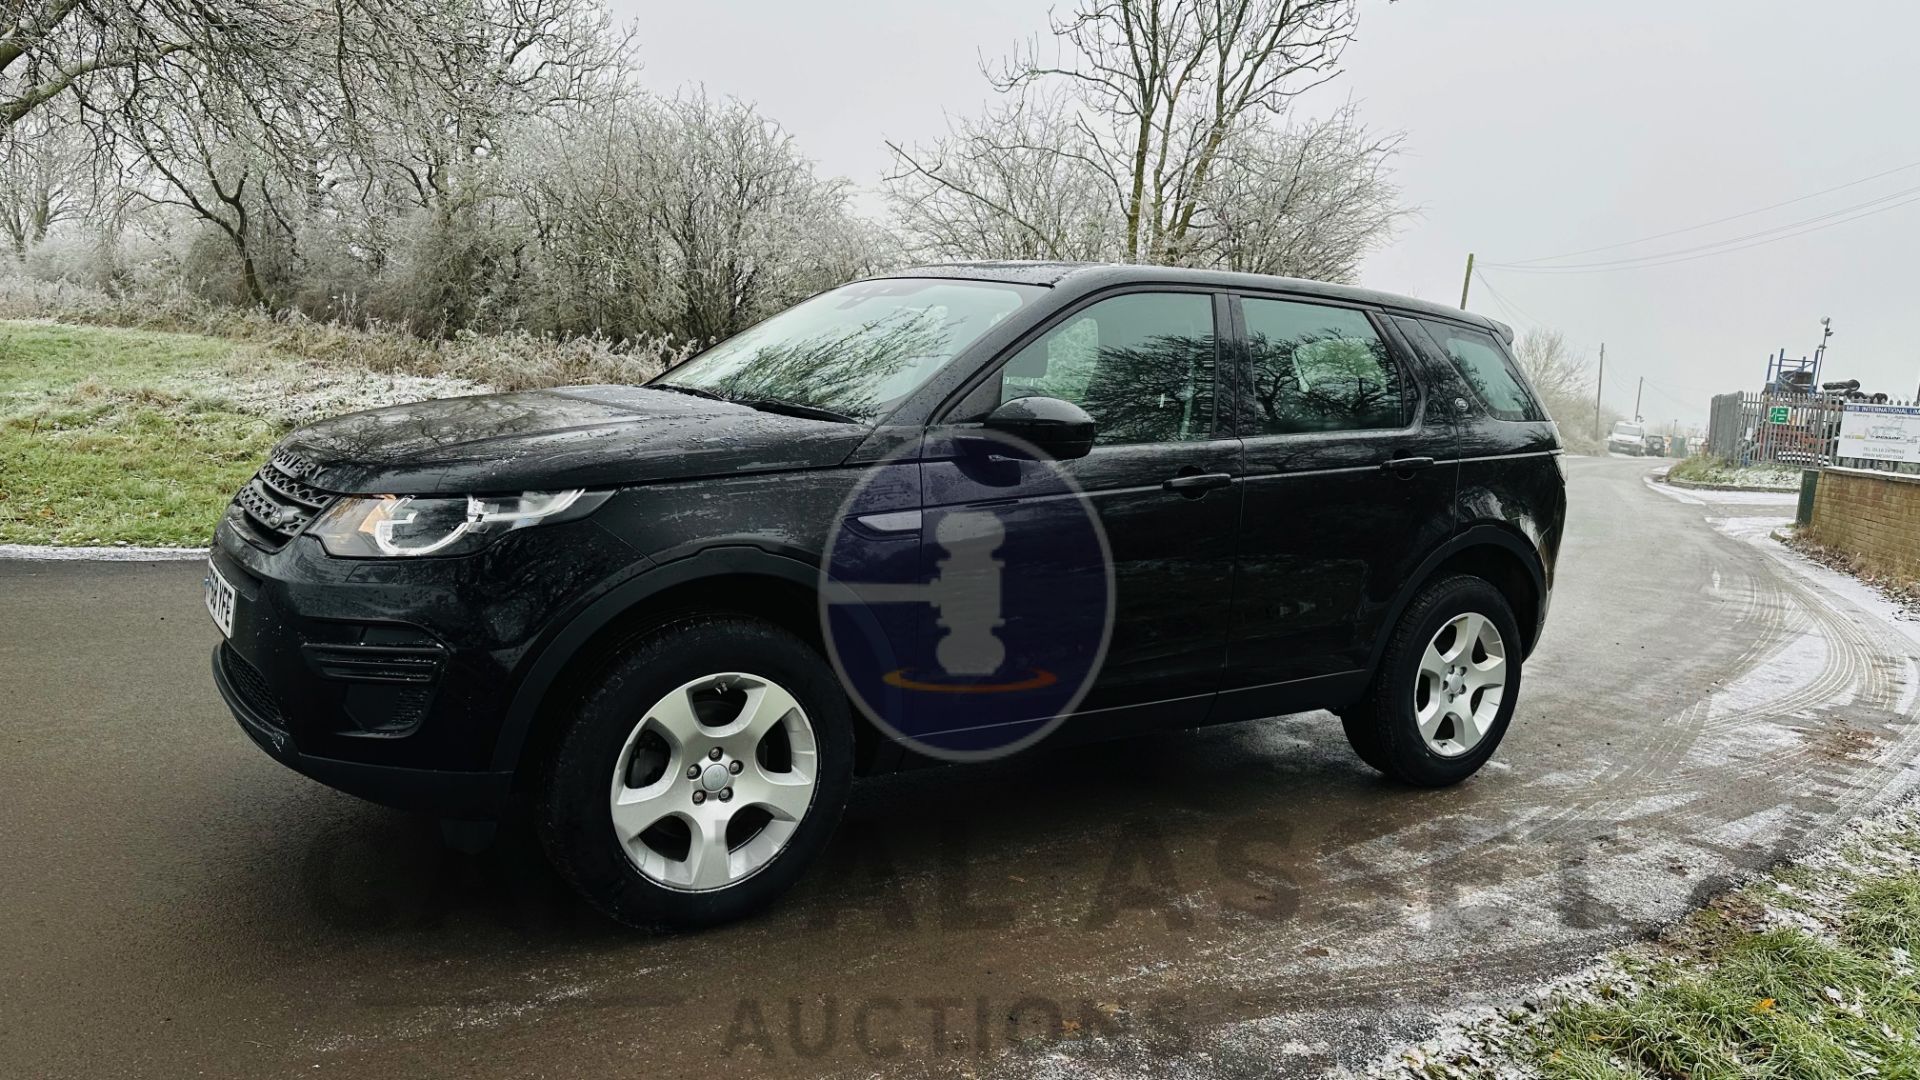 LAND ROVER DISCOVERY SPORT *5 DOOR SUV* (2019 - EURO 6) 2.0 ED4 - AUTO STOP/START *HUGE SPEC* - Image 7 of 41